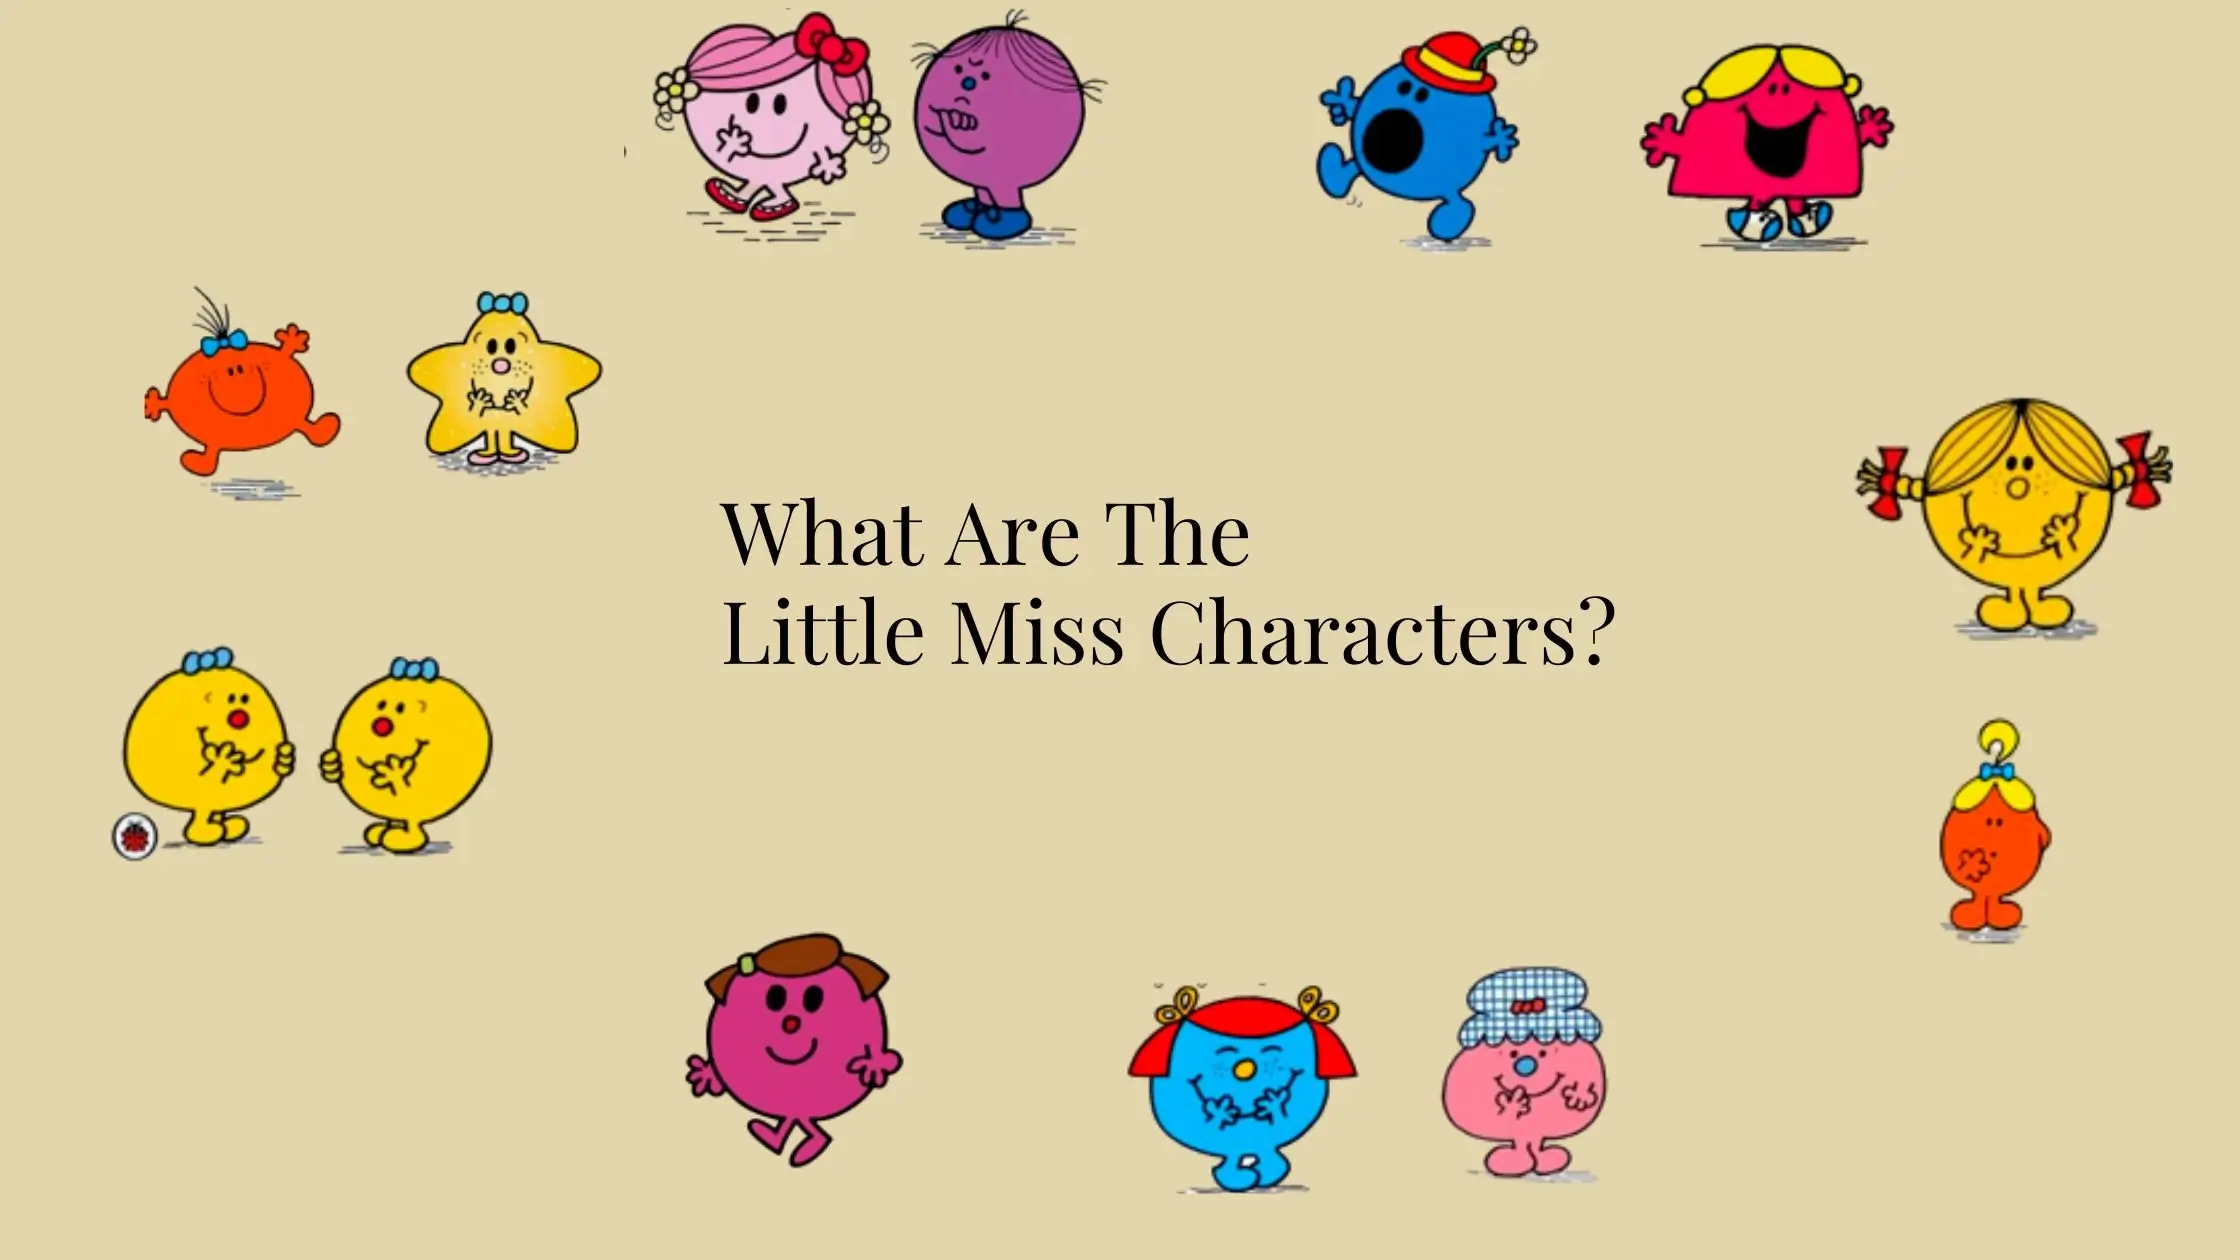 What Are The Little Miss Characters List Out The Little Miss Characters